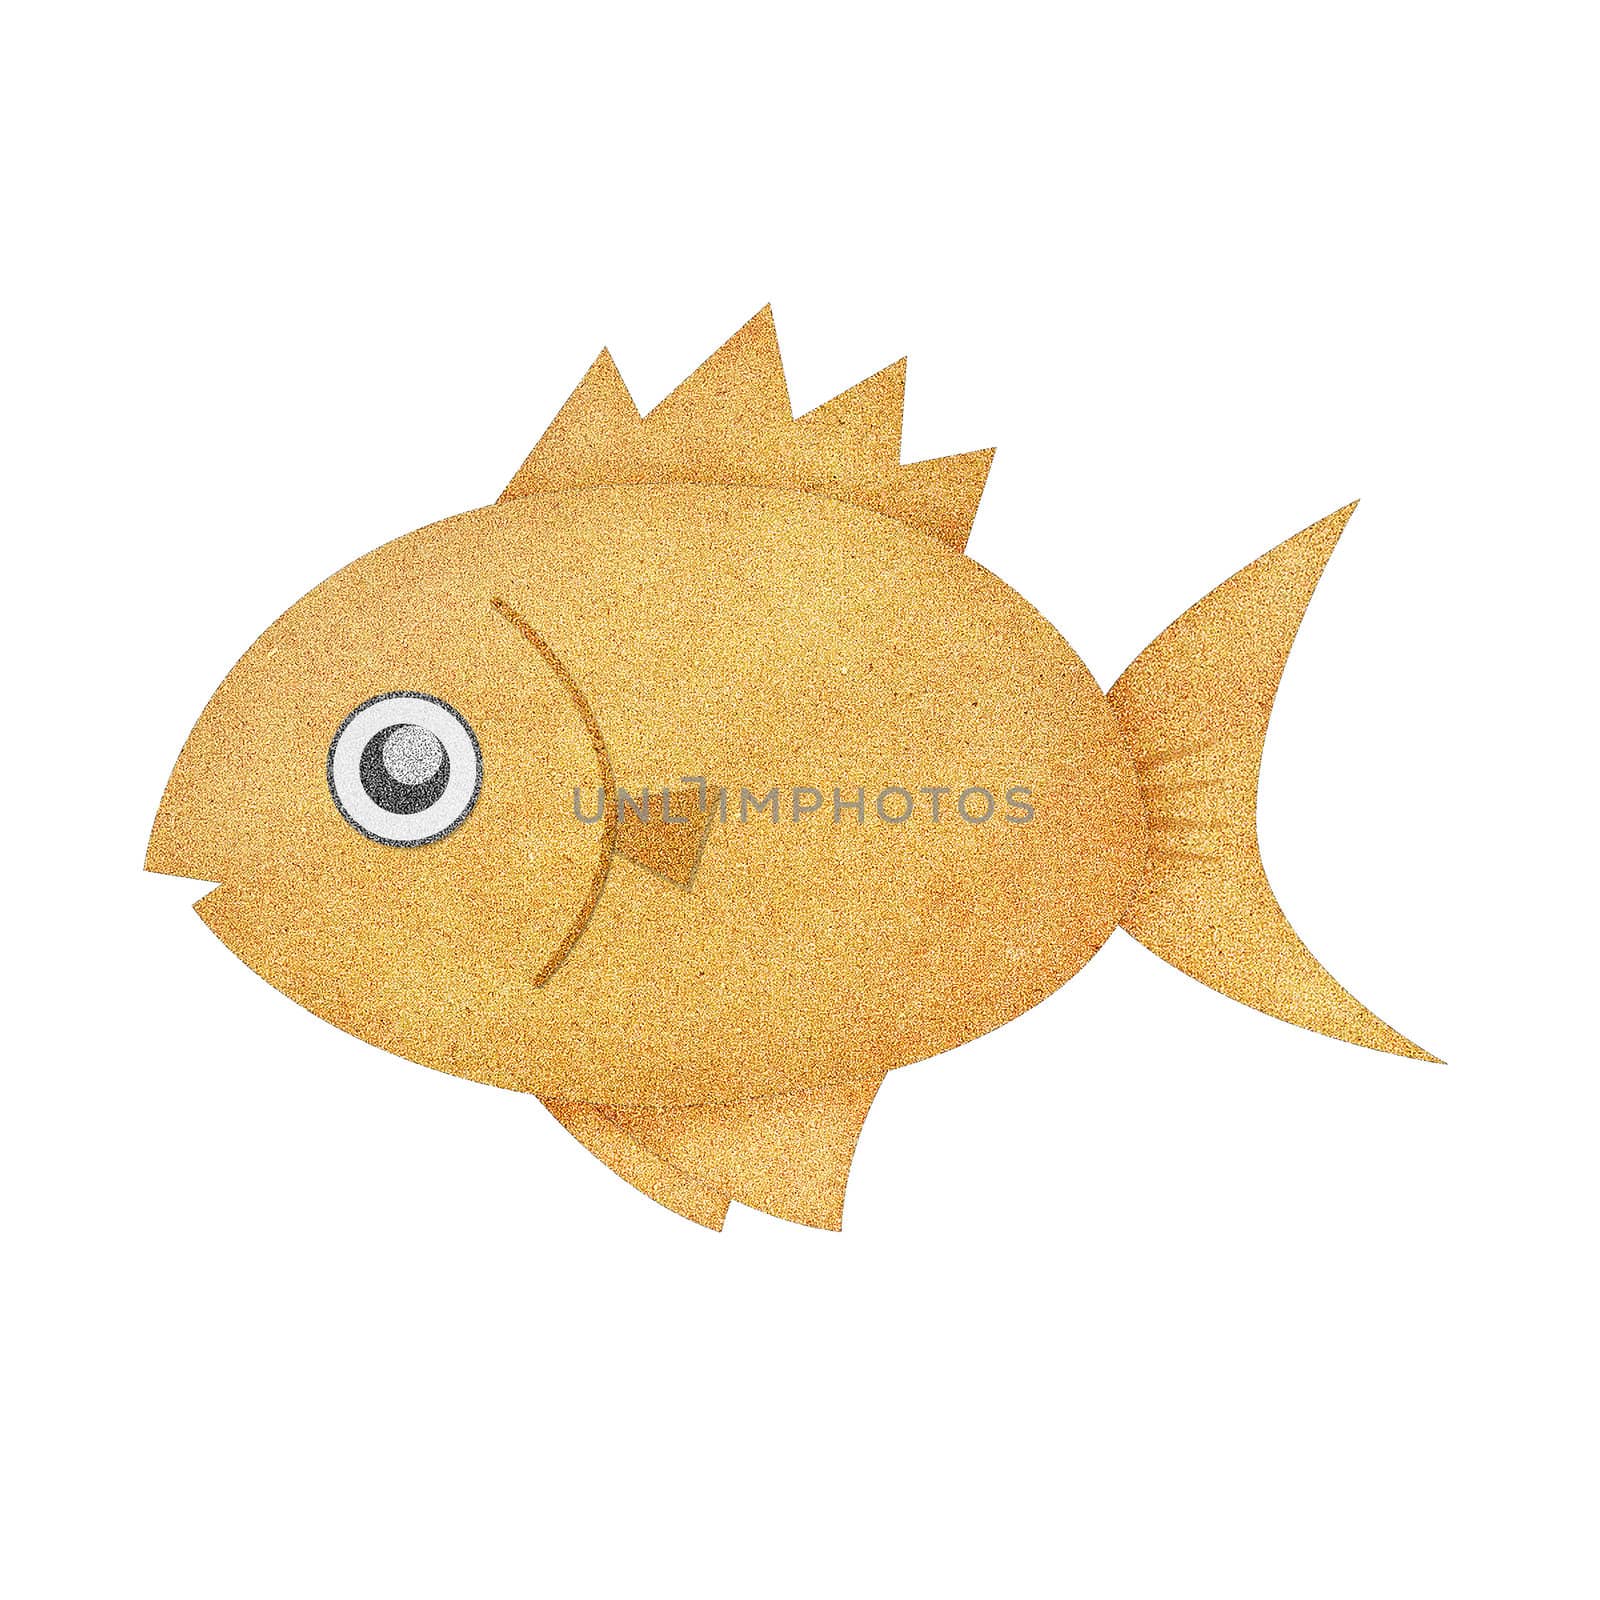 Recycled paper texture fish illustration isolated on white